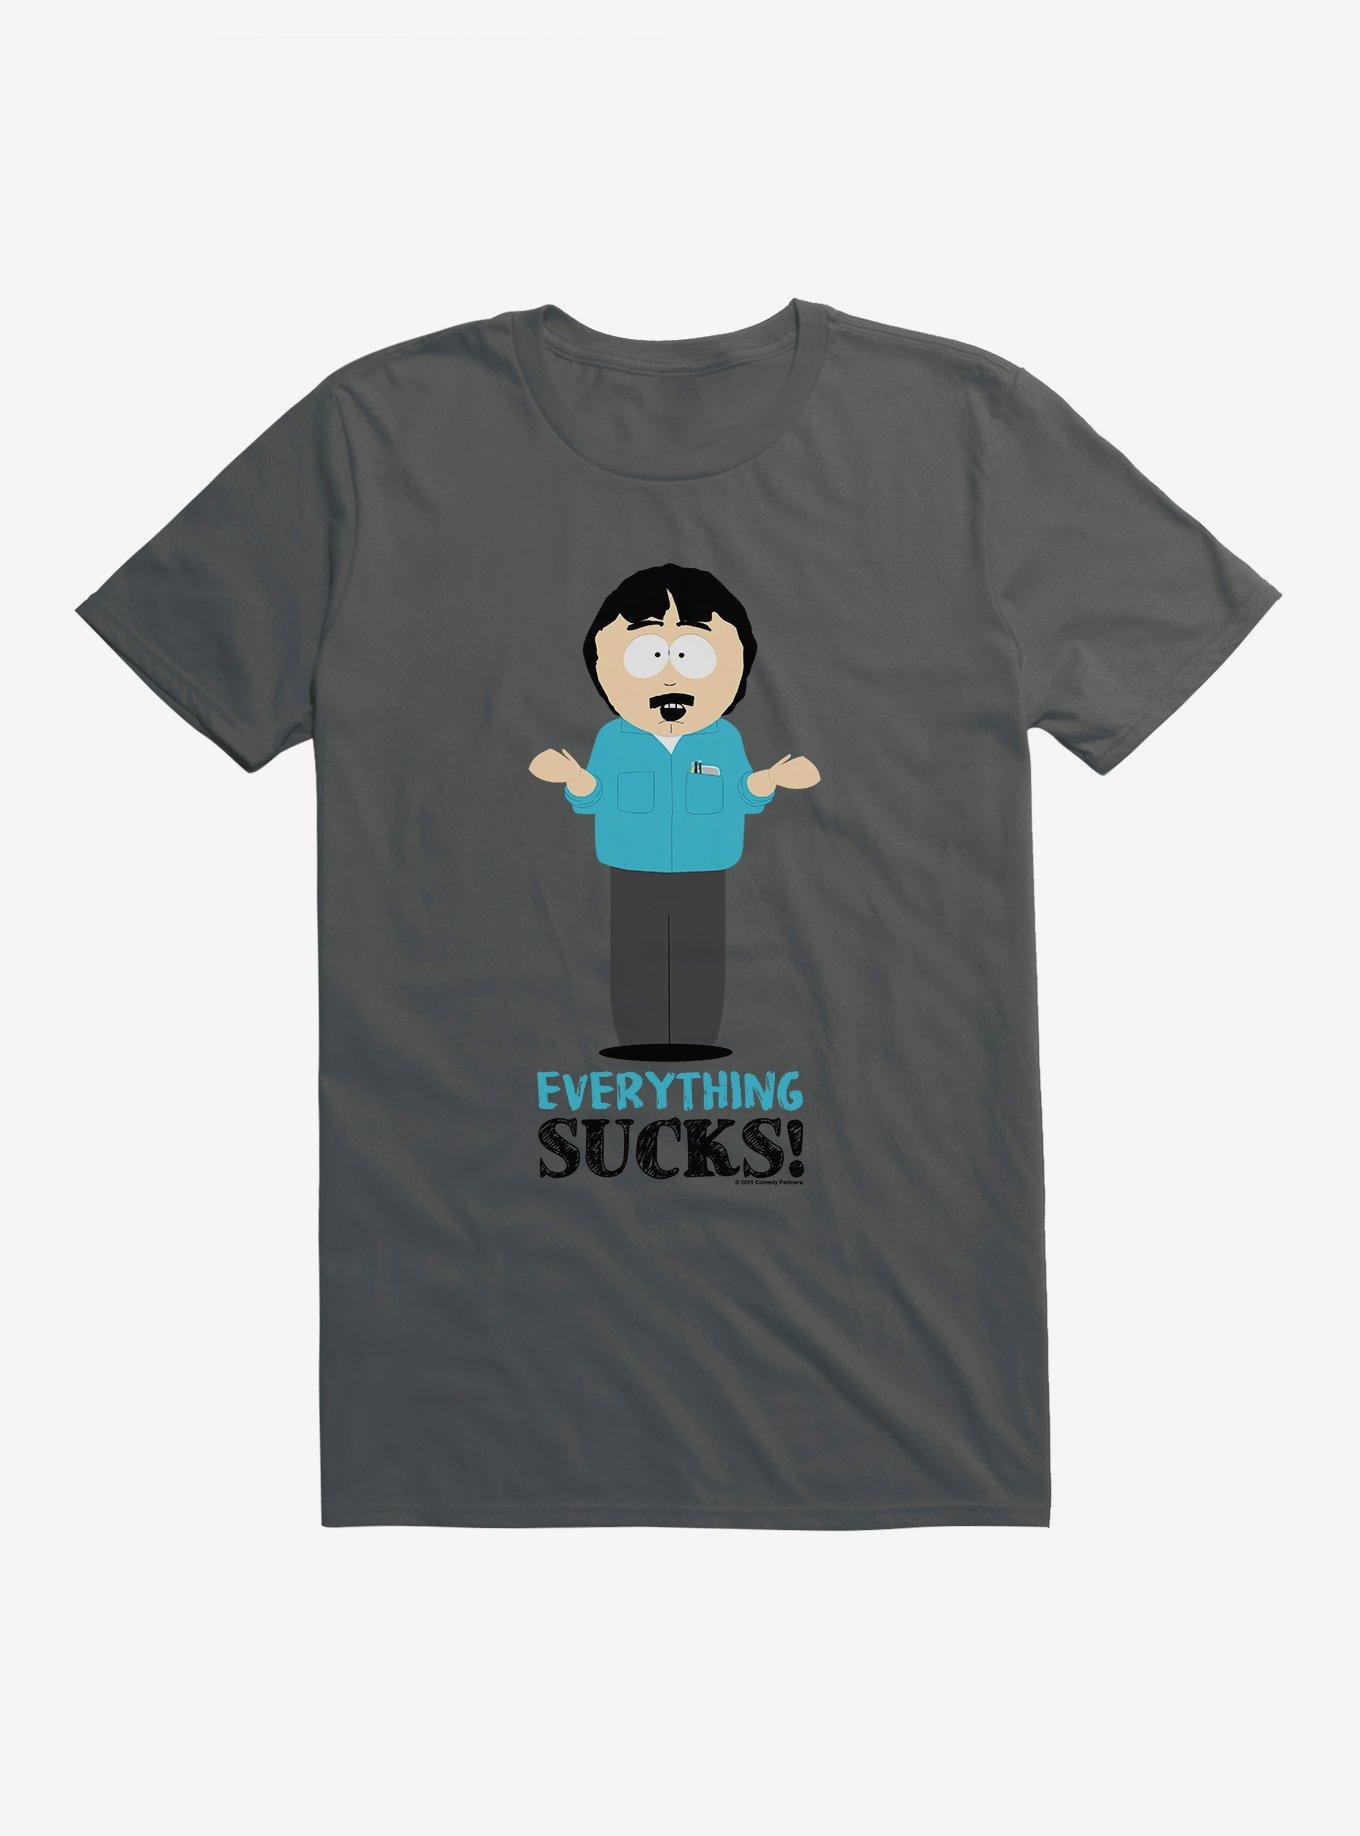 South Park Season Reference Everything Sucks T-Shirt, CHARCOAL, hi-res